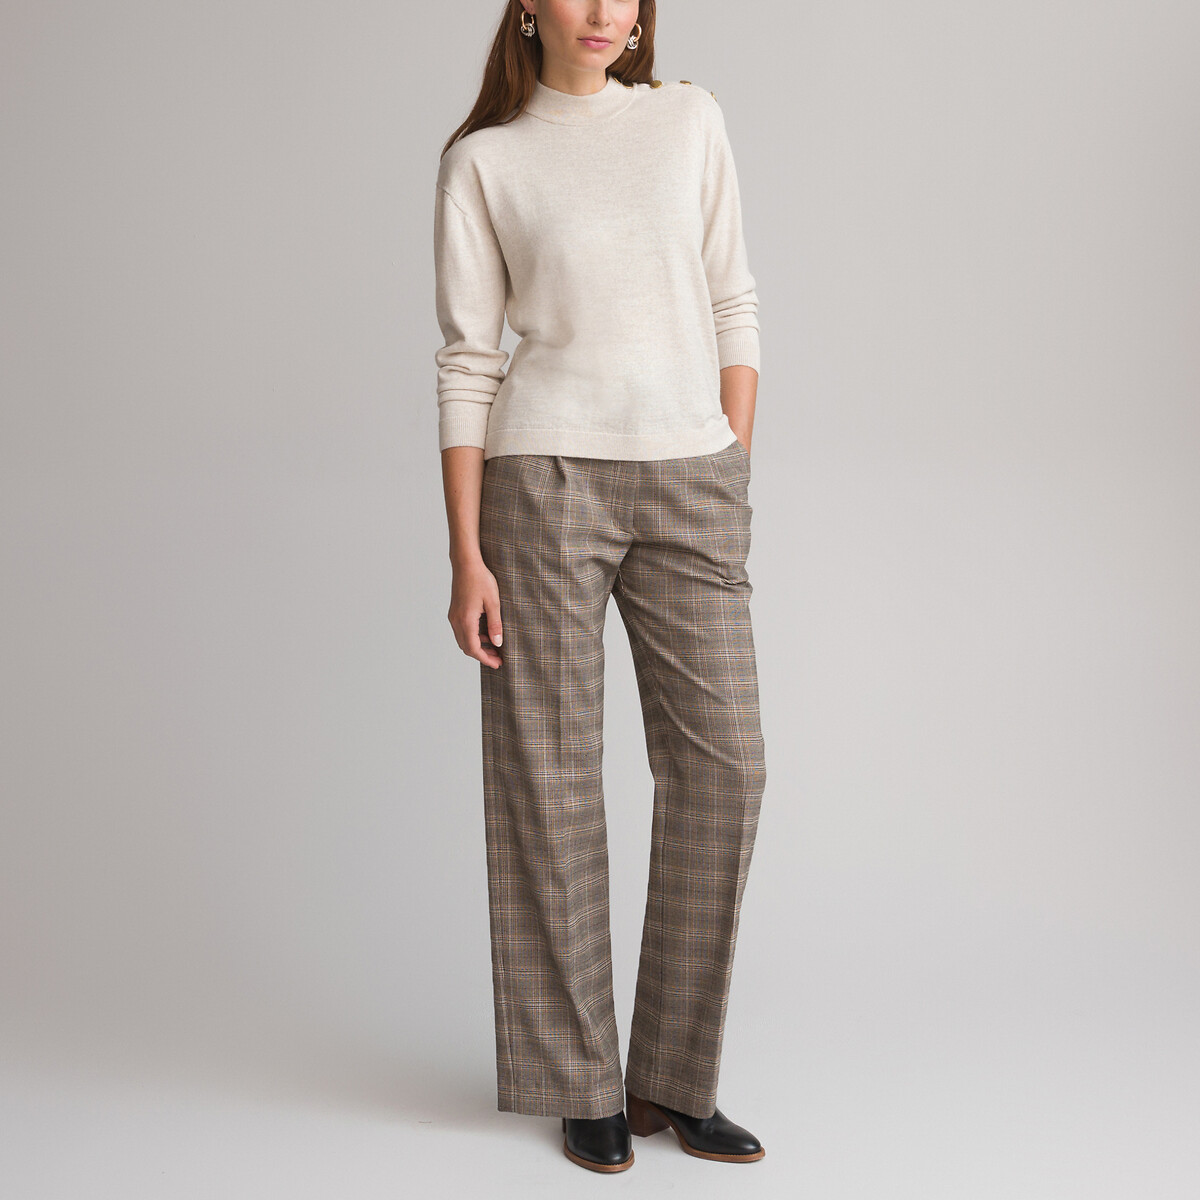 Image of Checked Wide Leg Trousers, Length 31.5"